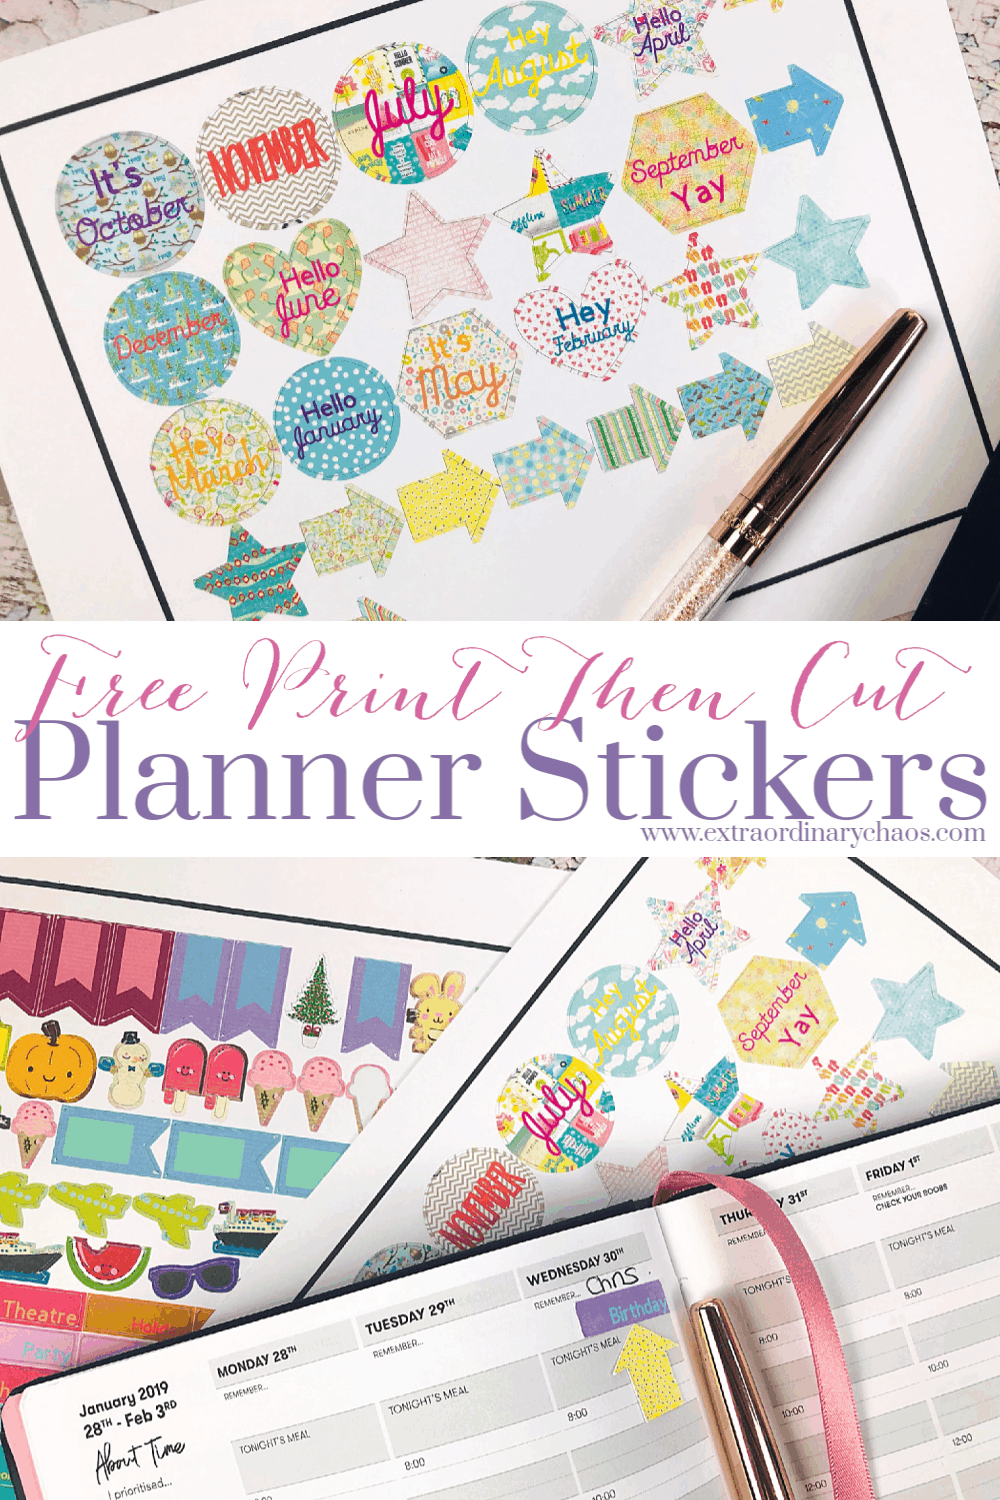 Free printable planner stickers made with the Cricut Maker #plannerstickers #cricutmaker #cricutprojects #cricutprintandcut